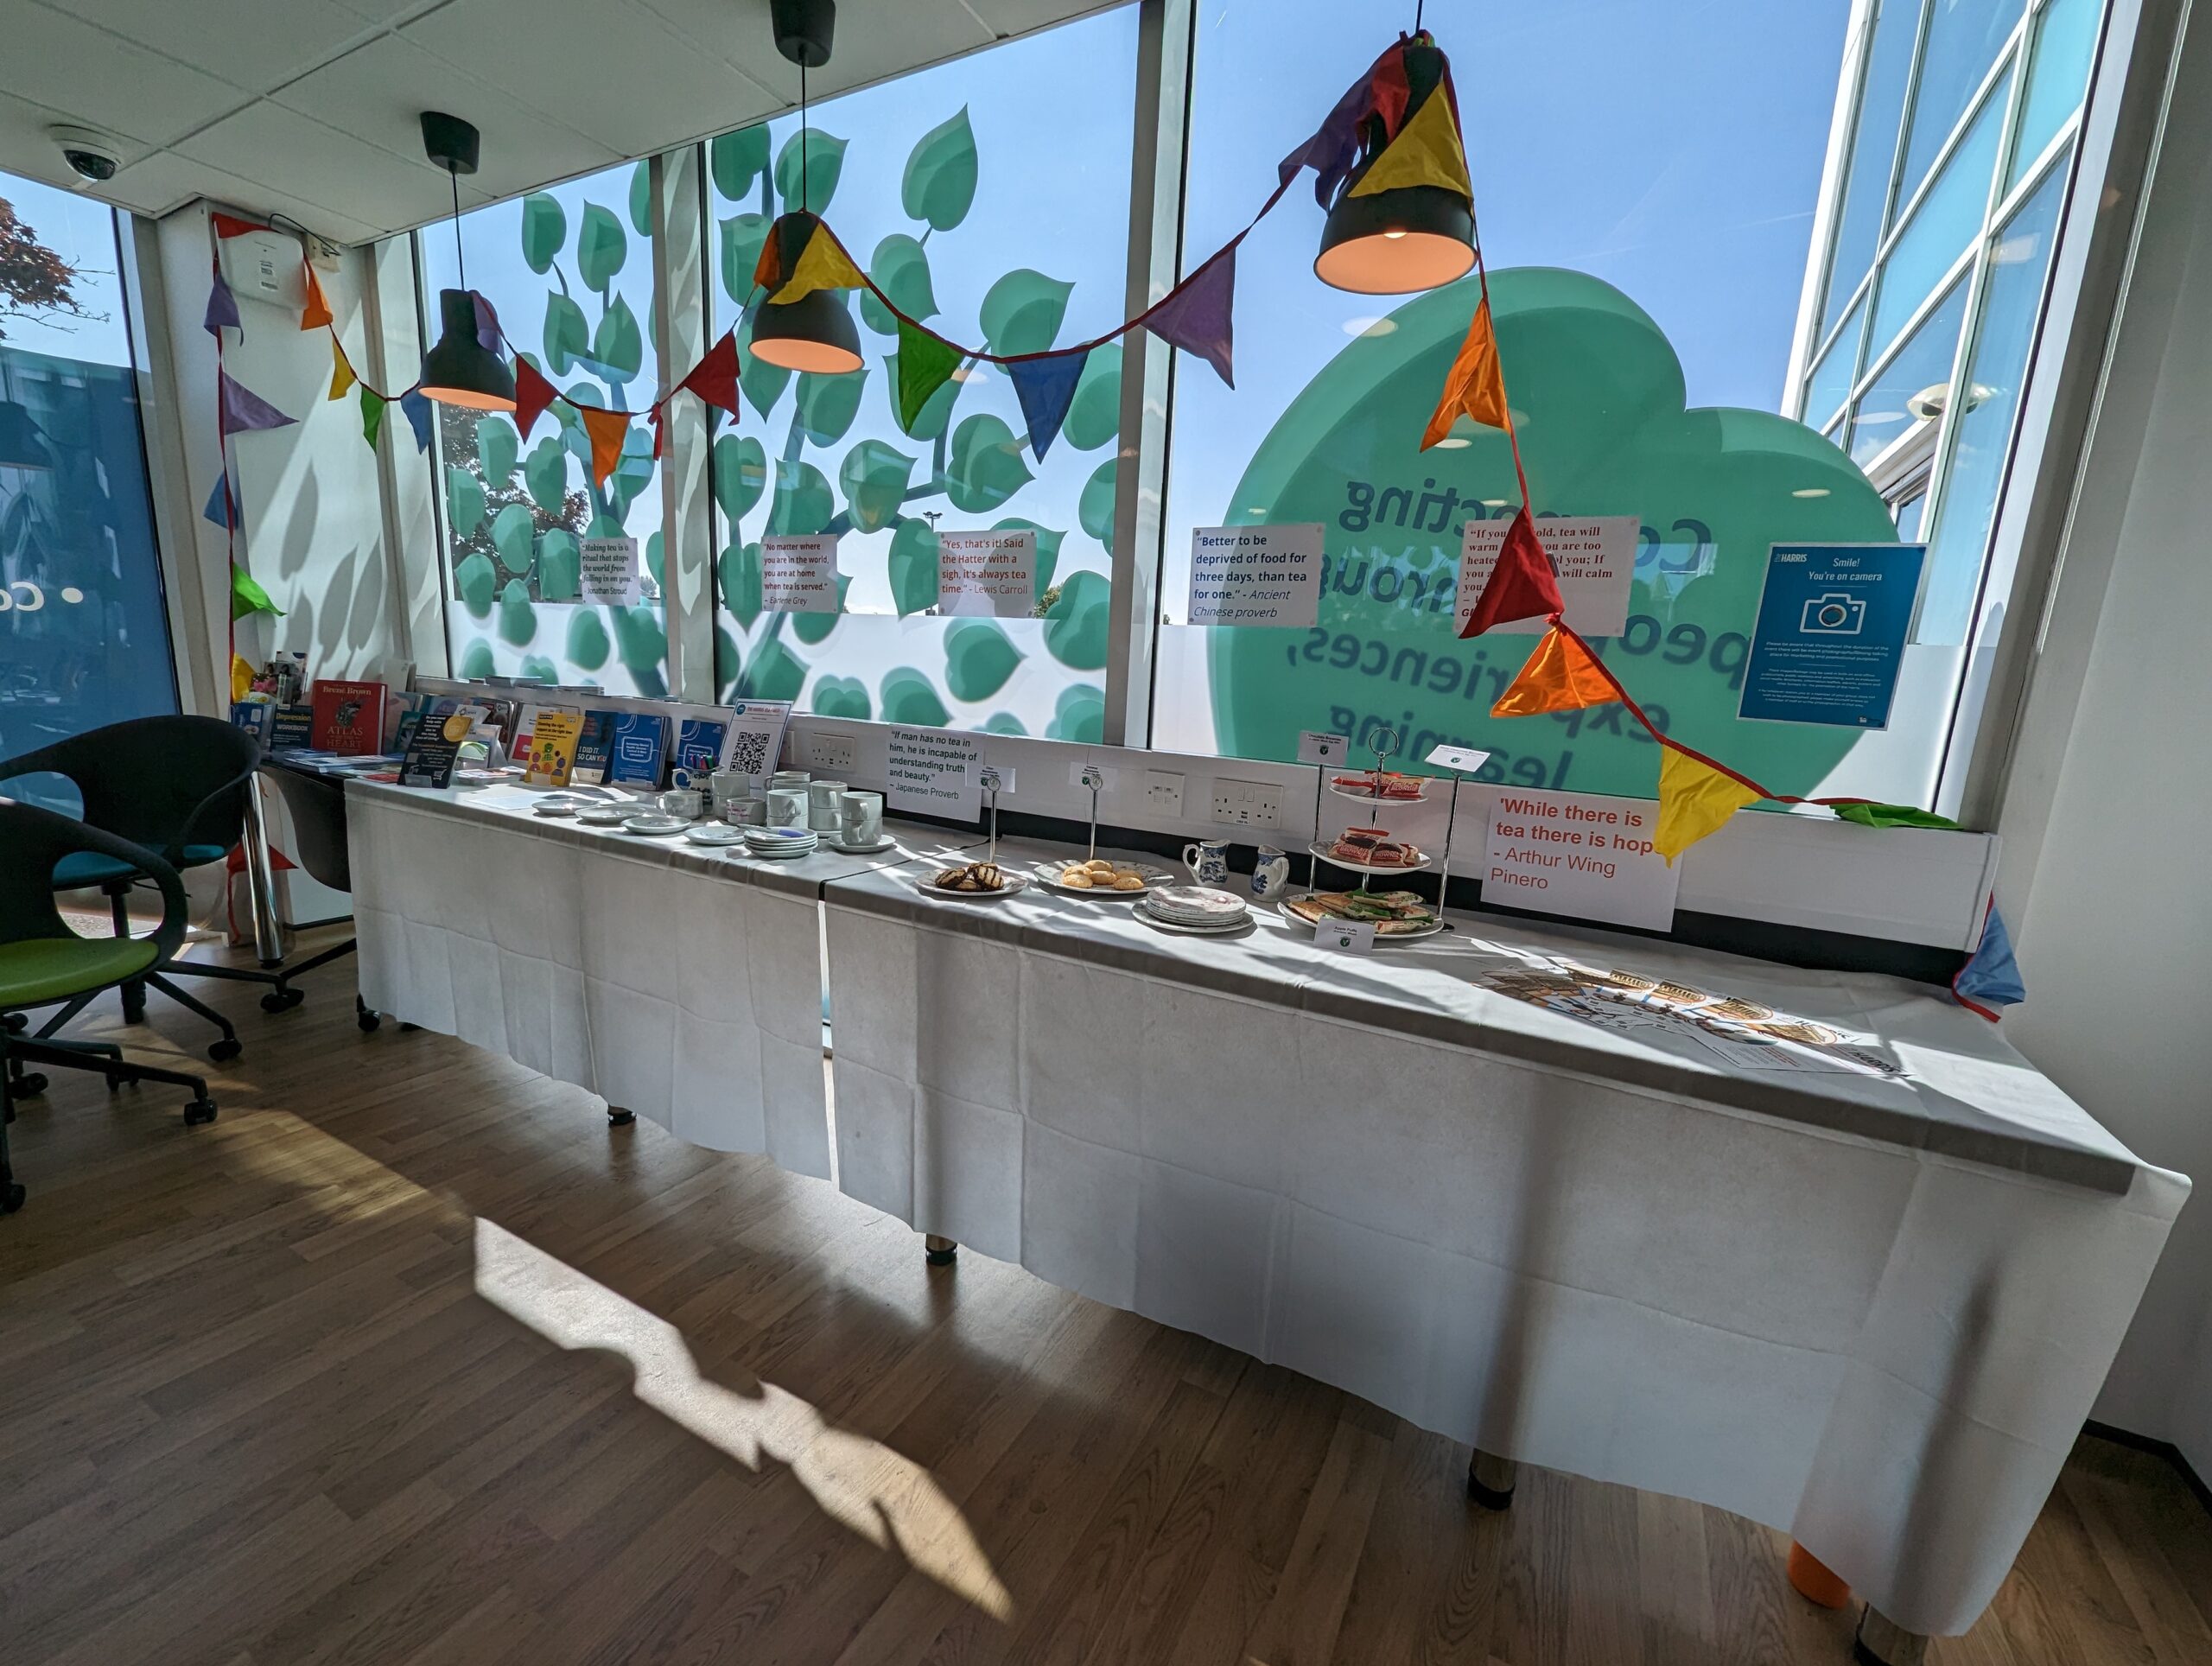 The tea display at Lancashire Recovery Collage. It features colourful bunting, a long table, cups and saucers, and famous quotes about tea on pieces of paper.